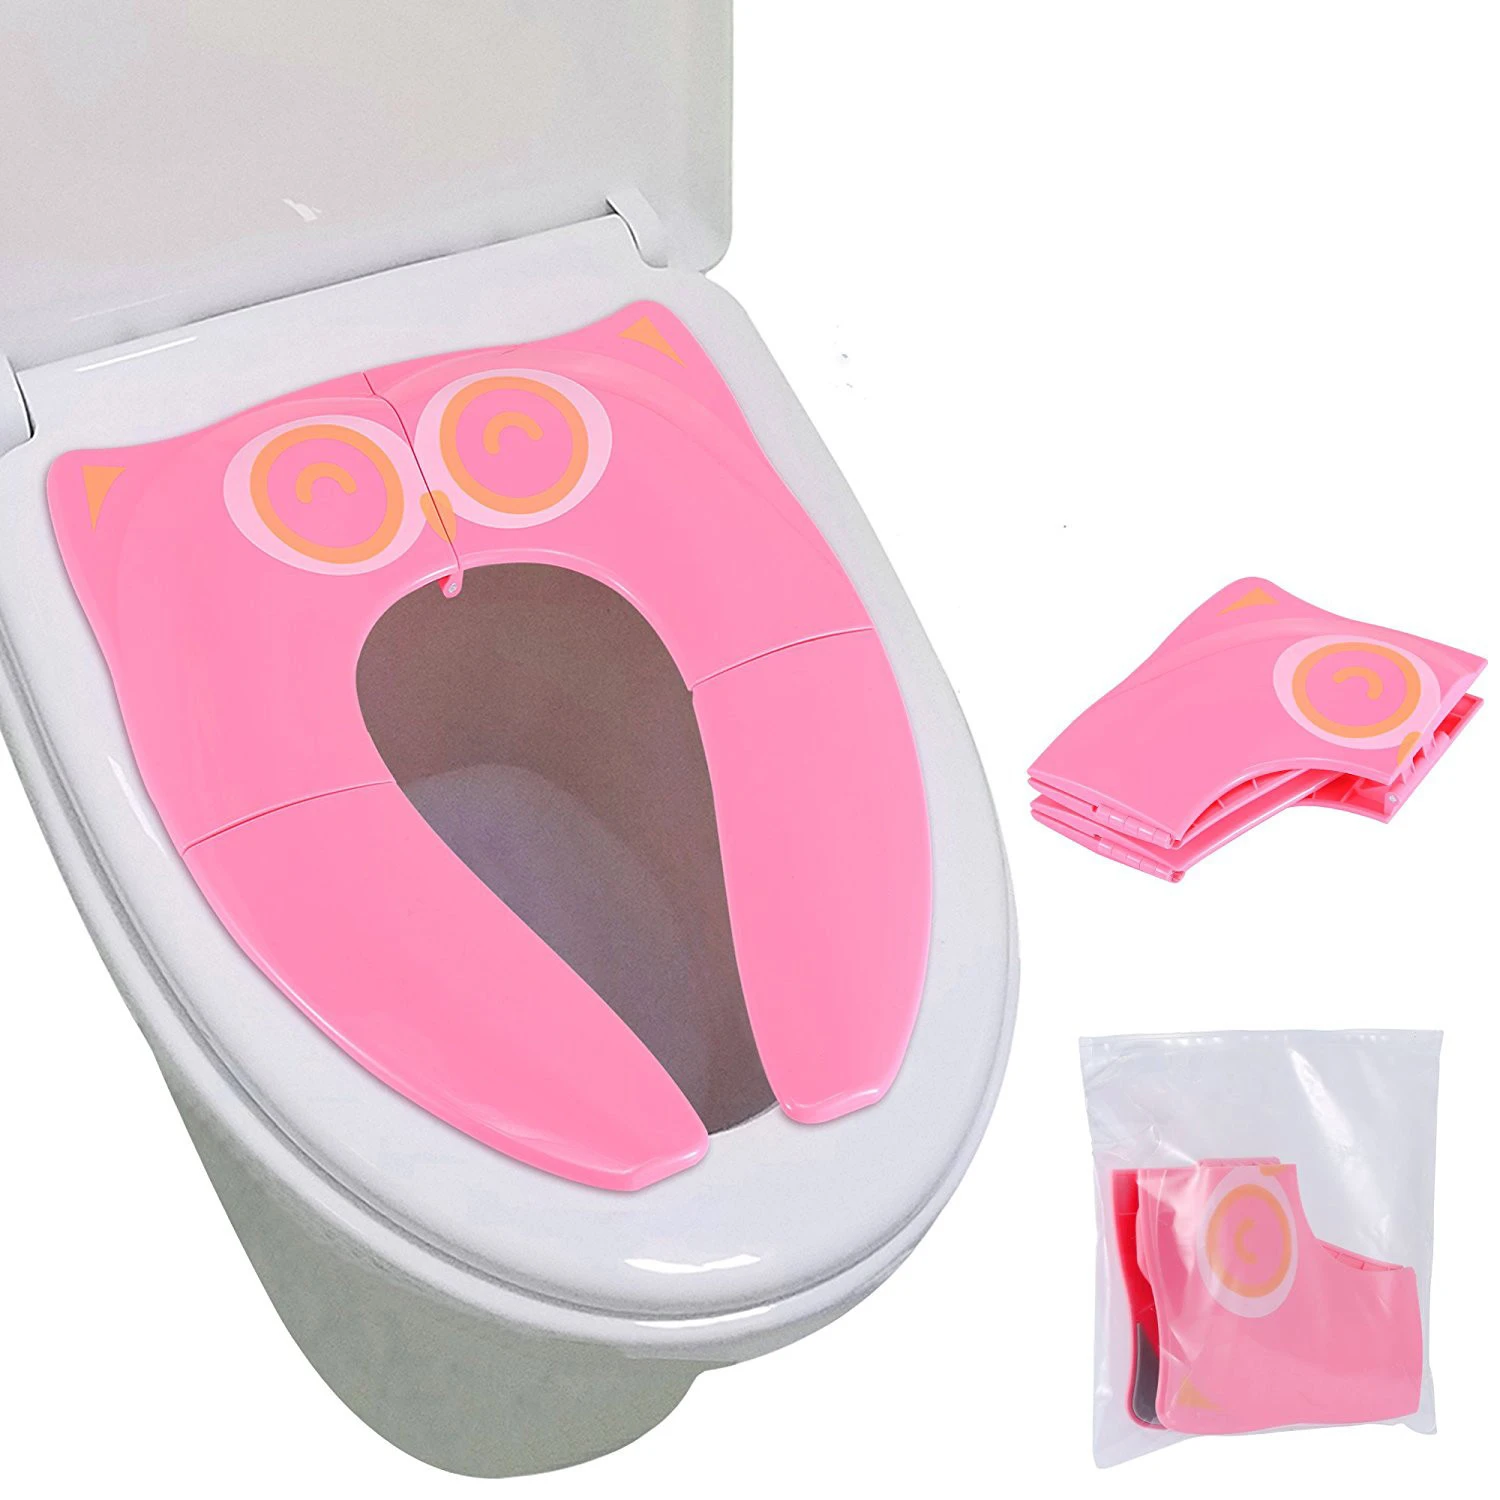 Portable Potty Seat for Toddler Travel - Foldable Non-Slip Potty Training Toilet Seat Cover for Boys/Girls